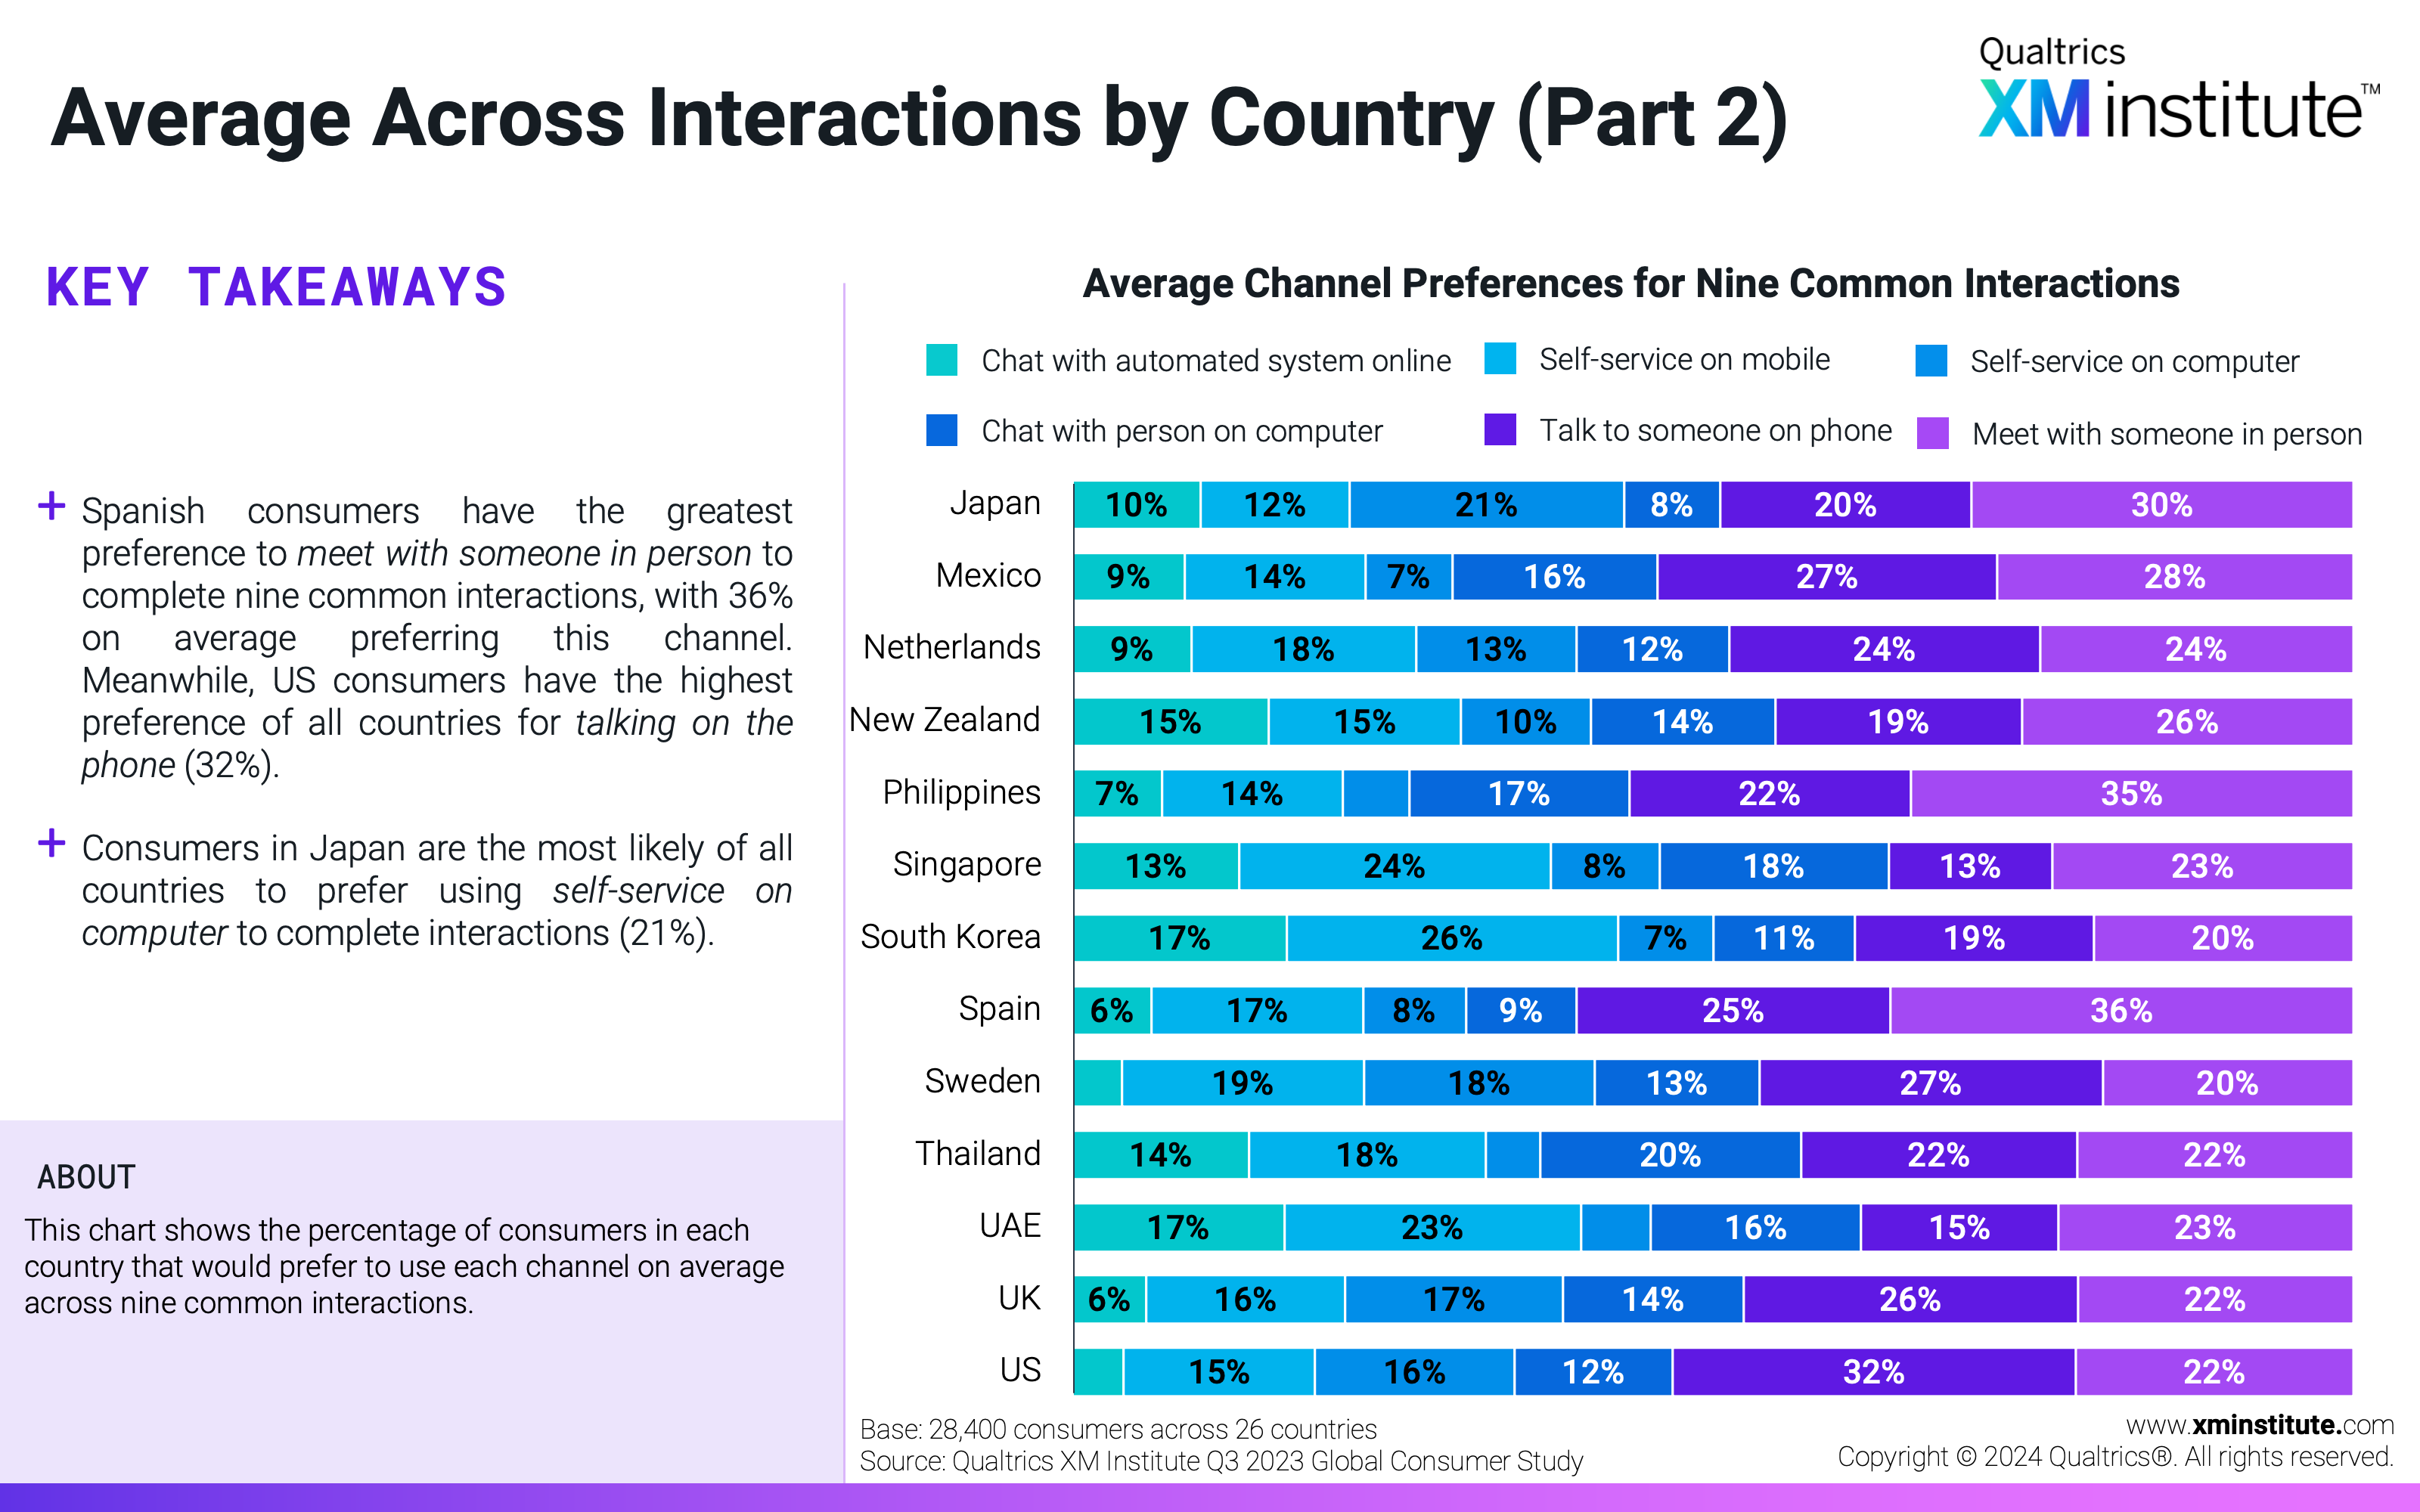 This chart shows the percentage of consumers in each country that would prefer to use each channel on average across nine common interactions. 